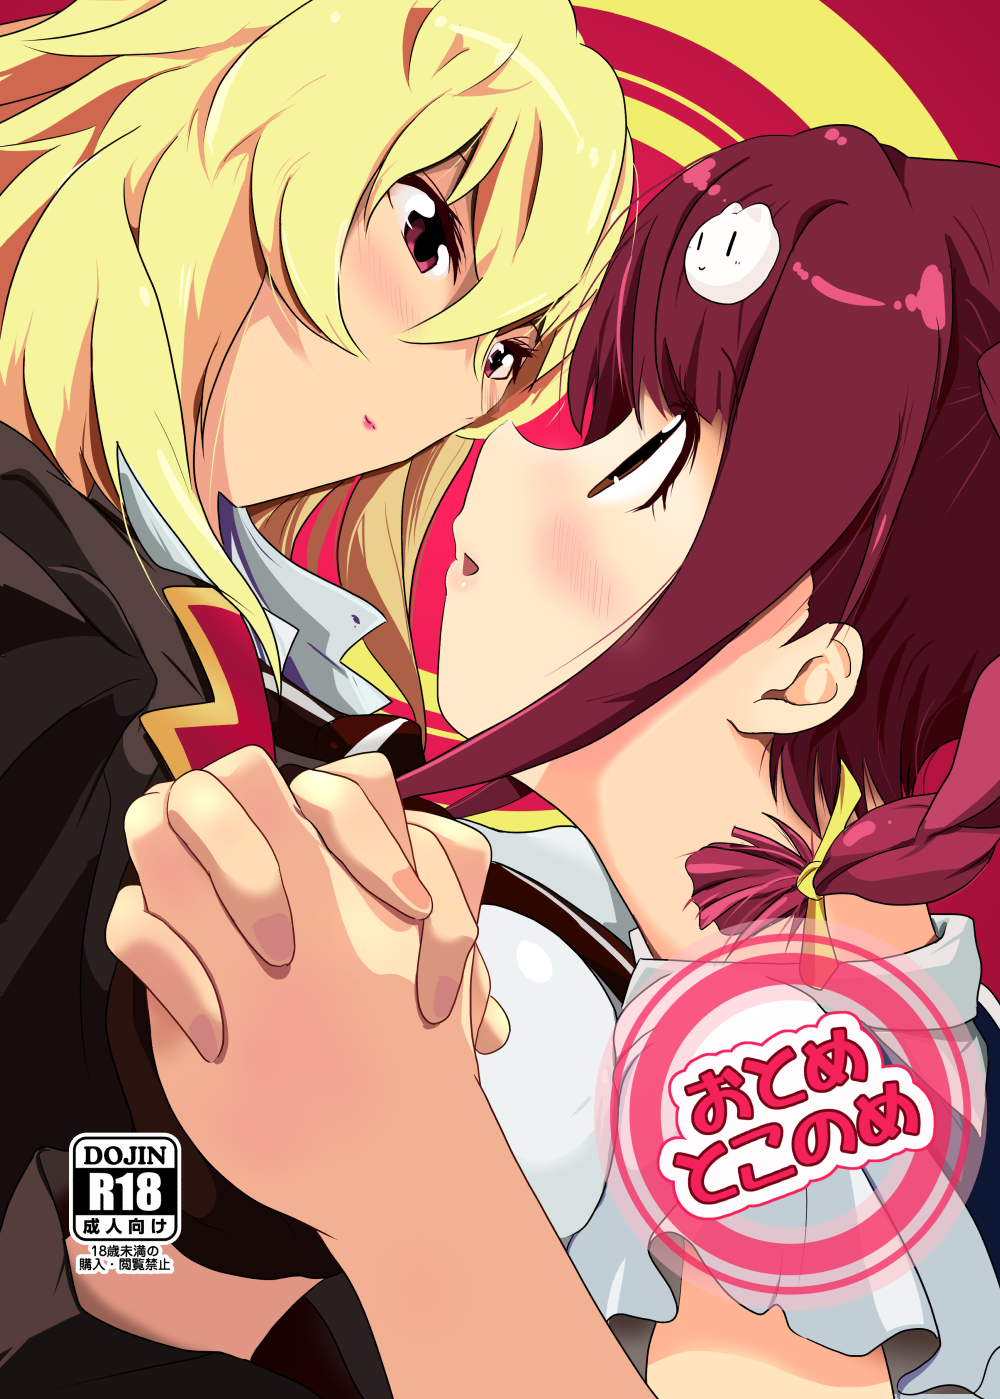 2girls blonde_hair blush brown_eyes close-up collared_shirt commentary_request cover cover_page face-to-face hair_between_eyes hair_ornament hair_ribbon hand_holding highres interlocked_fingers kaburaya_seiden looking_at_another multiple_girls open_mouth rating red_hair ribbon shikishima_mirei shirt short_sleeves smile tokonome_mamori translation_request valkyrie_drive valkyrie_drive_-mermaid- yellow_ribbon yuri